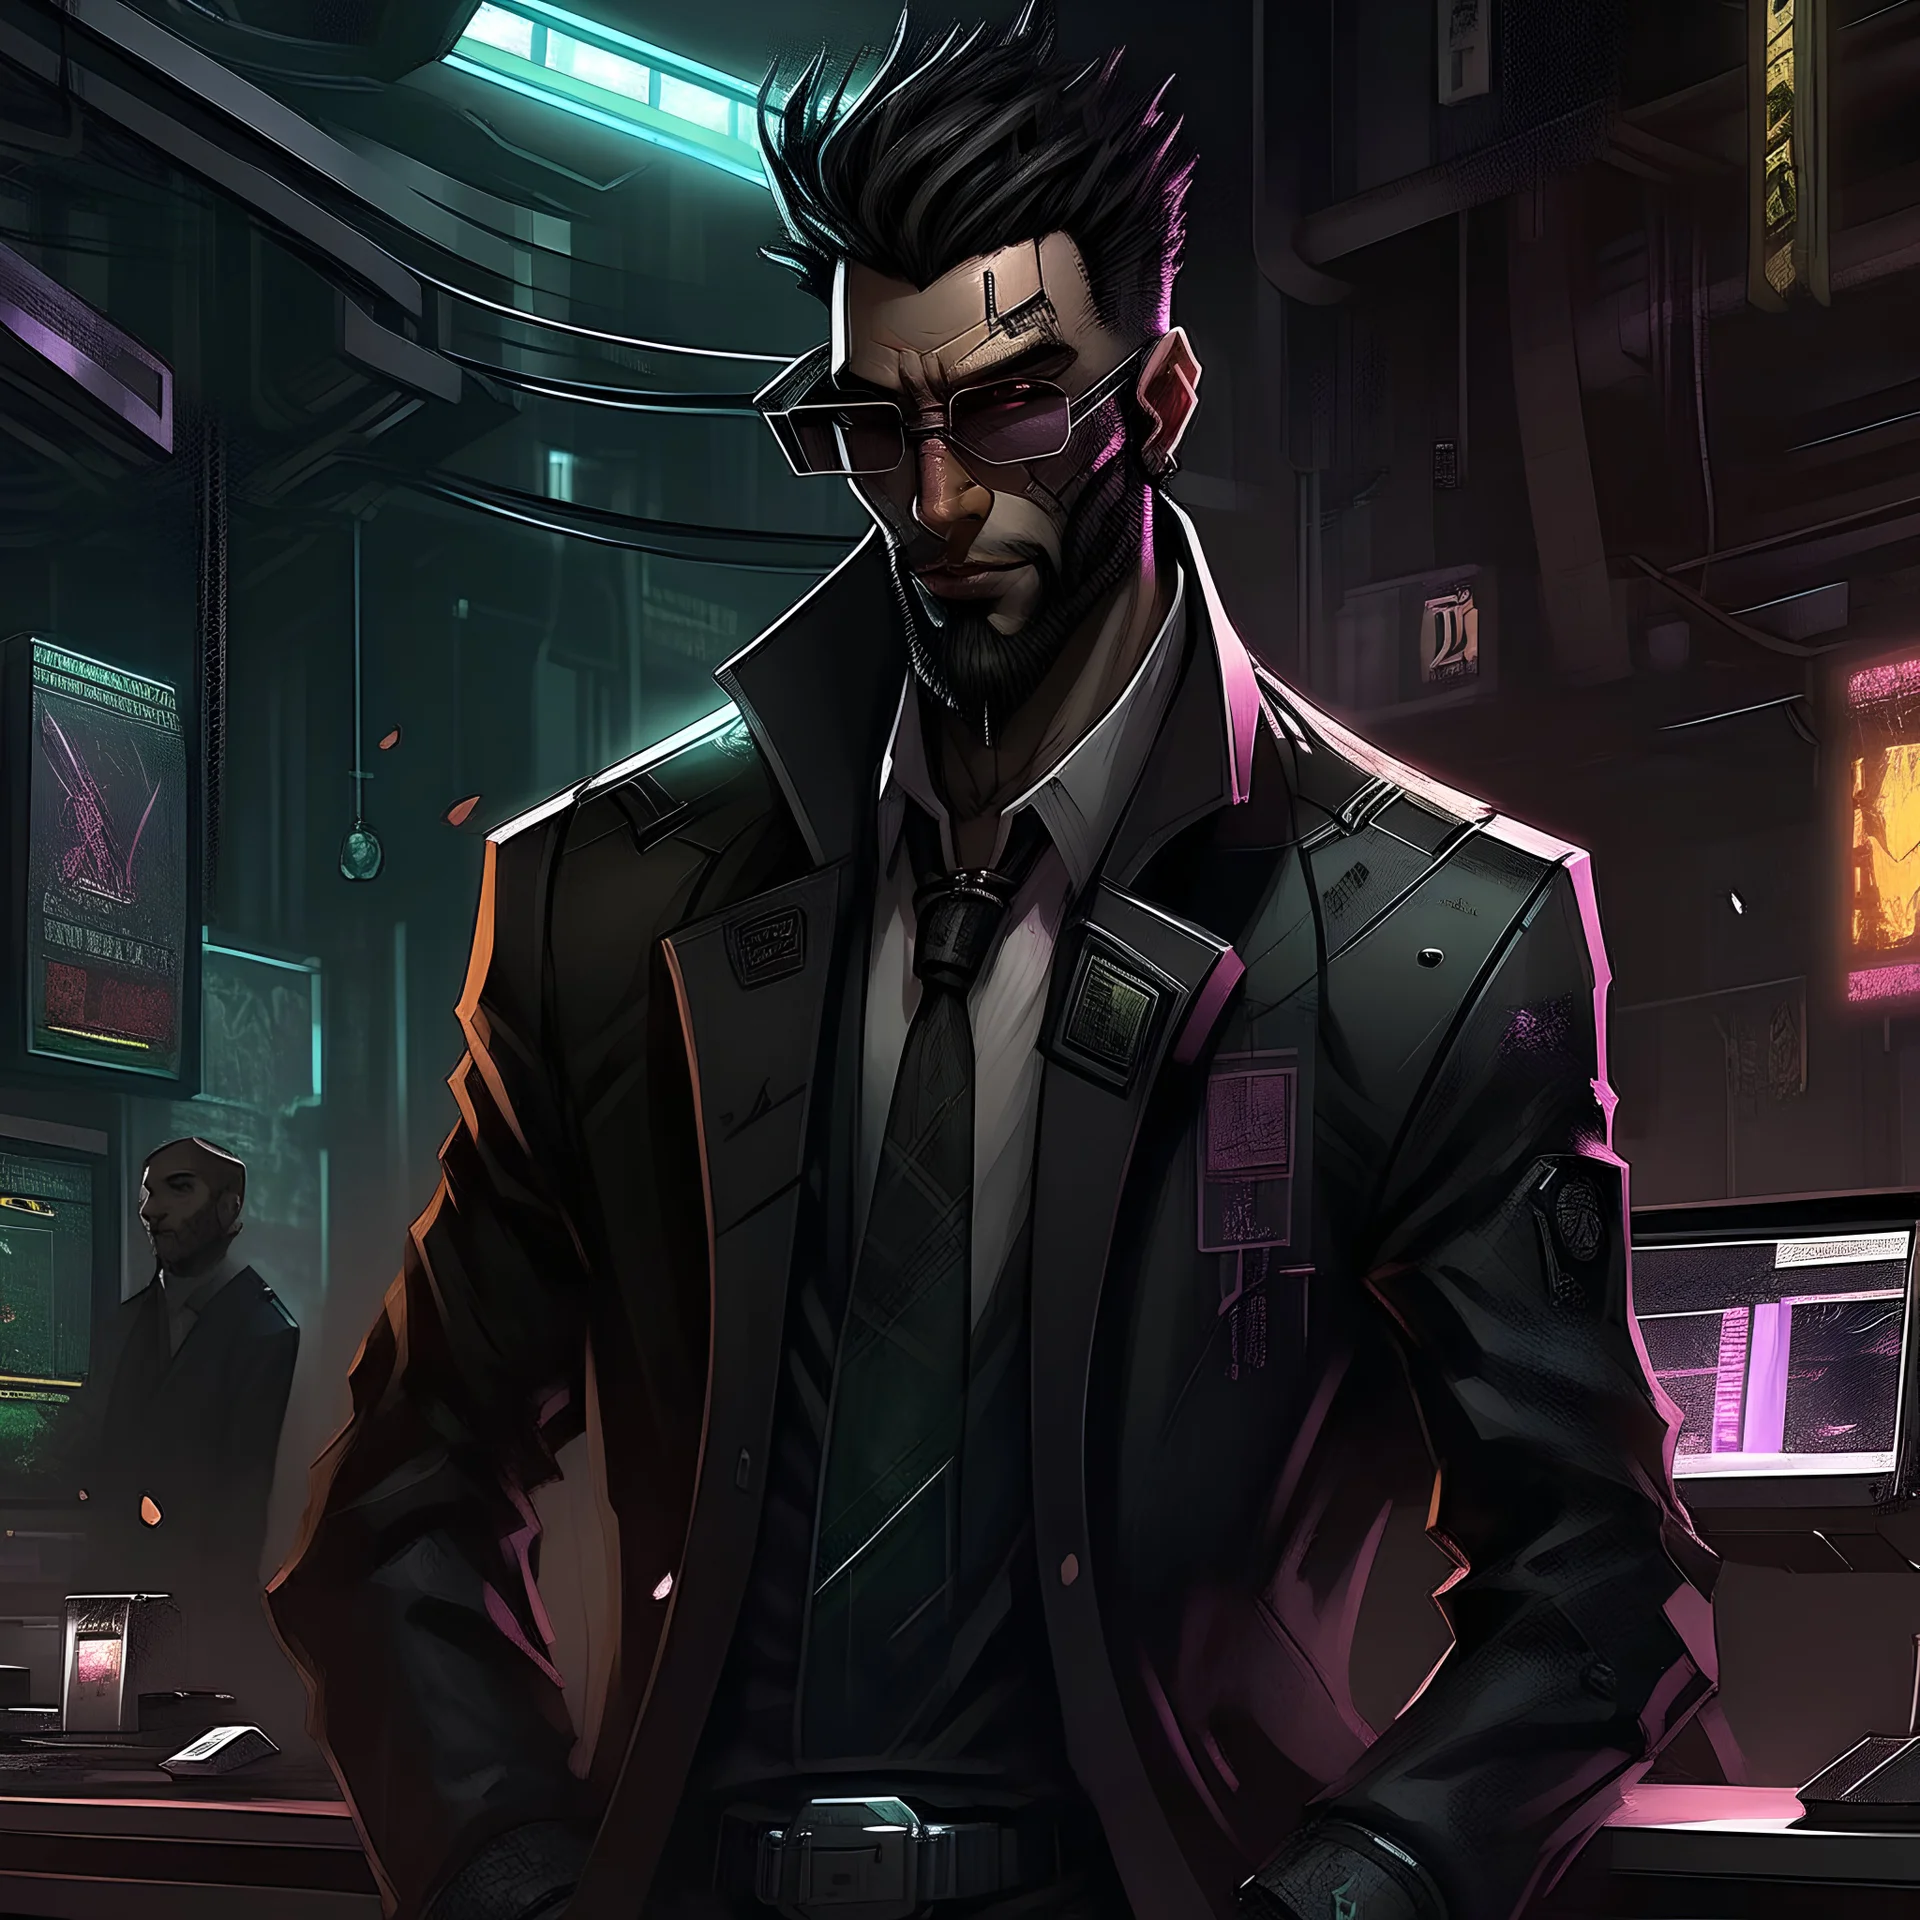 Generate a visually striking digital artwork of a Cyberpunk fixer who operates a casino. The fixer is characterized by being short and heavier in build, exuding an air of authority and cunning. His distinct features include greasy black combed-over hair, reminiscent of a classic James Bond villain. The fixer is impeccably dressed in a tacky yet stylish suit that complements his unique persona. The casino setting should be reflected in the background, with neon lights, futuristic elements, and an